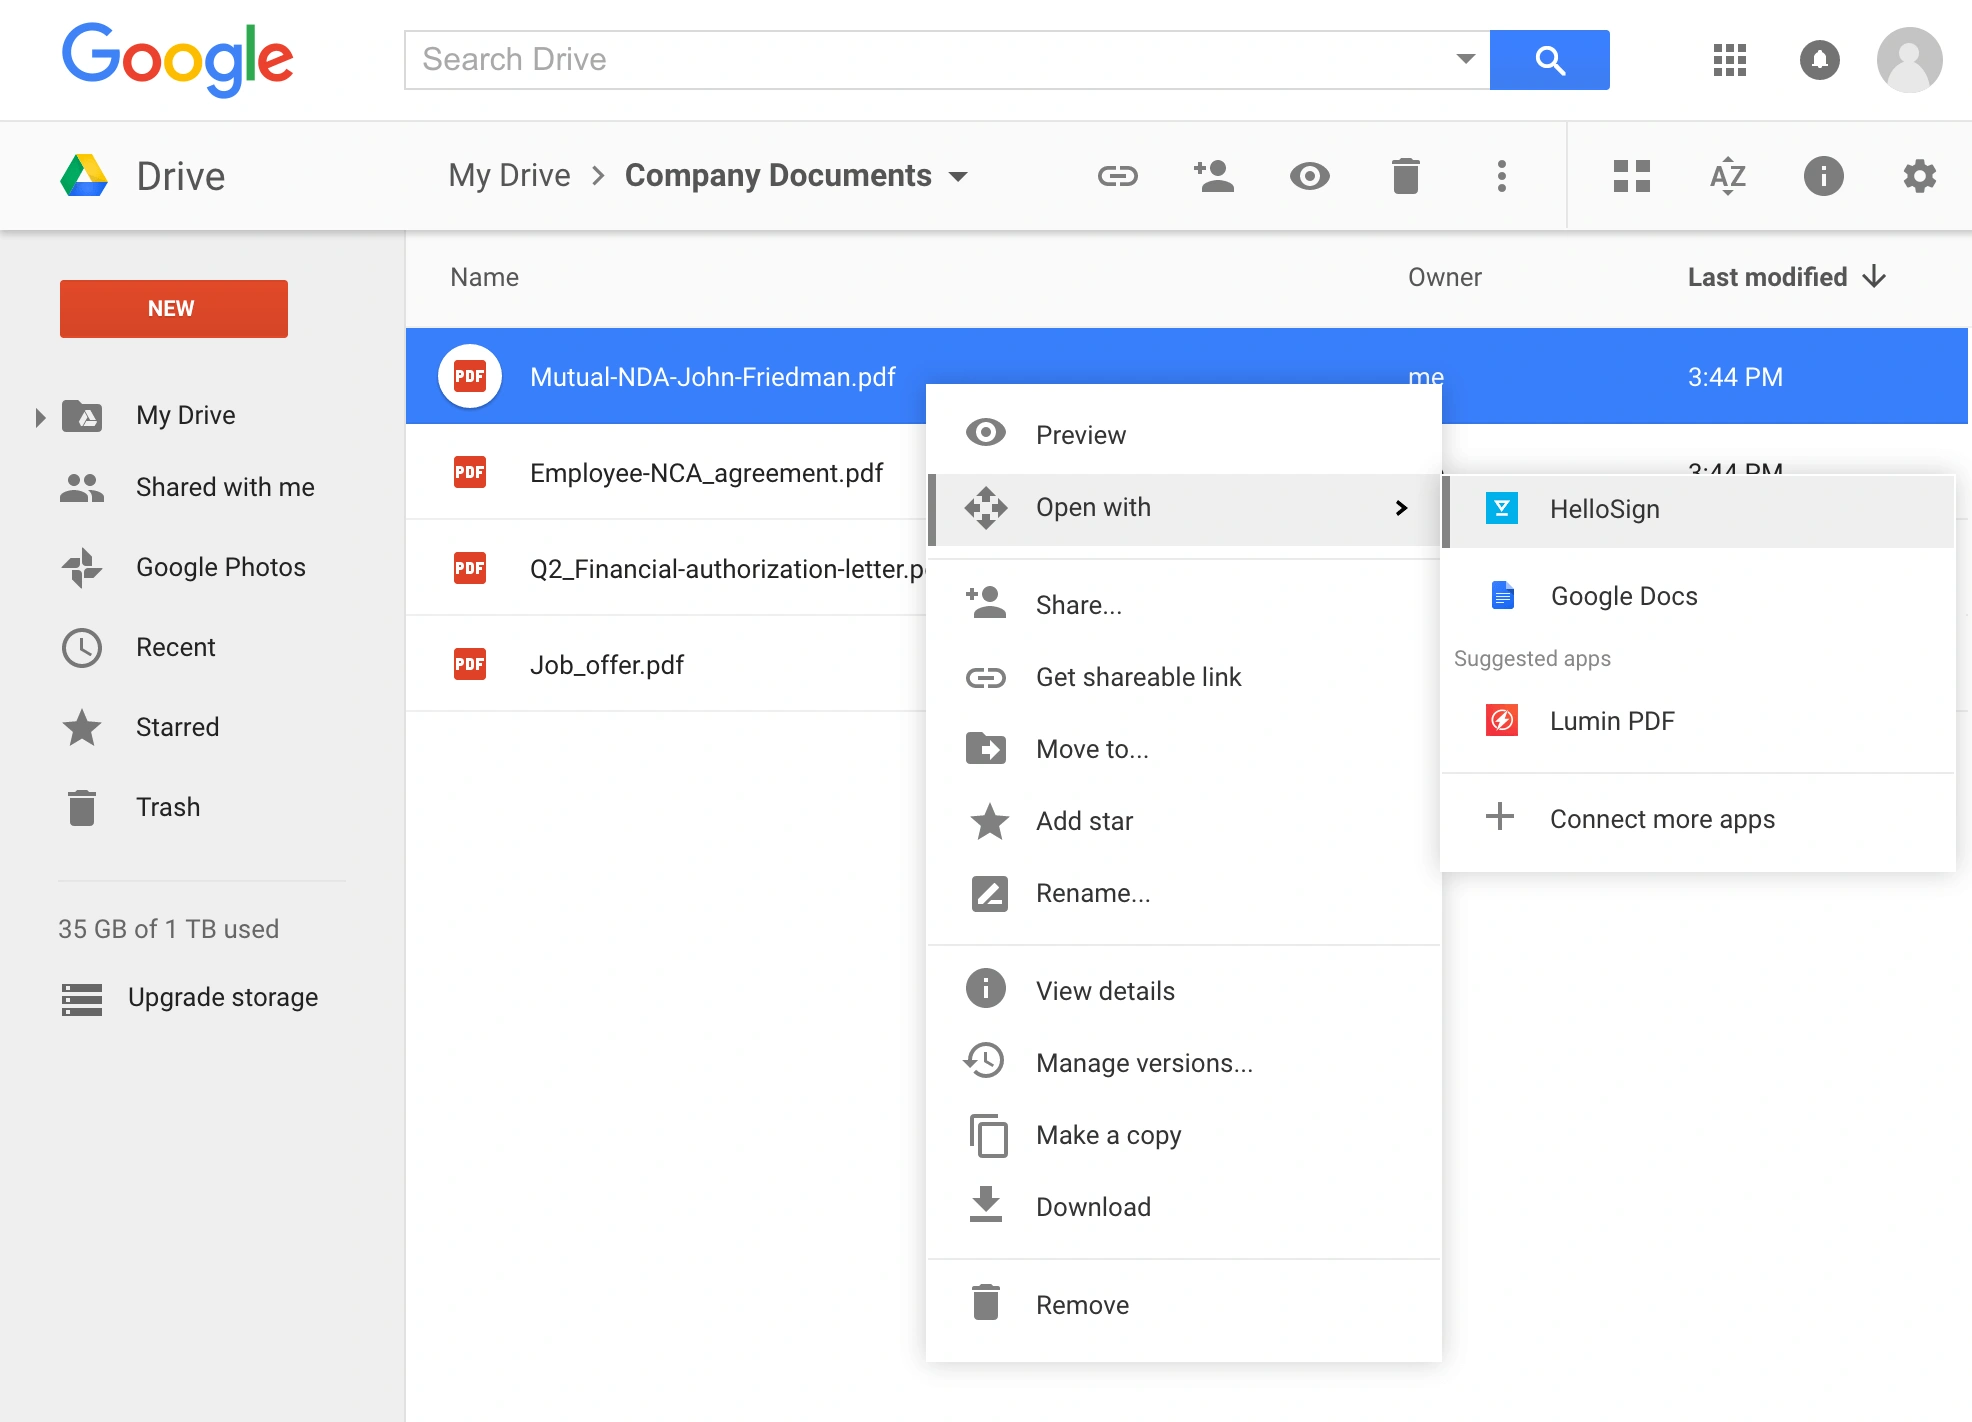 Get Your Google Drive Organised featured image